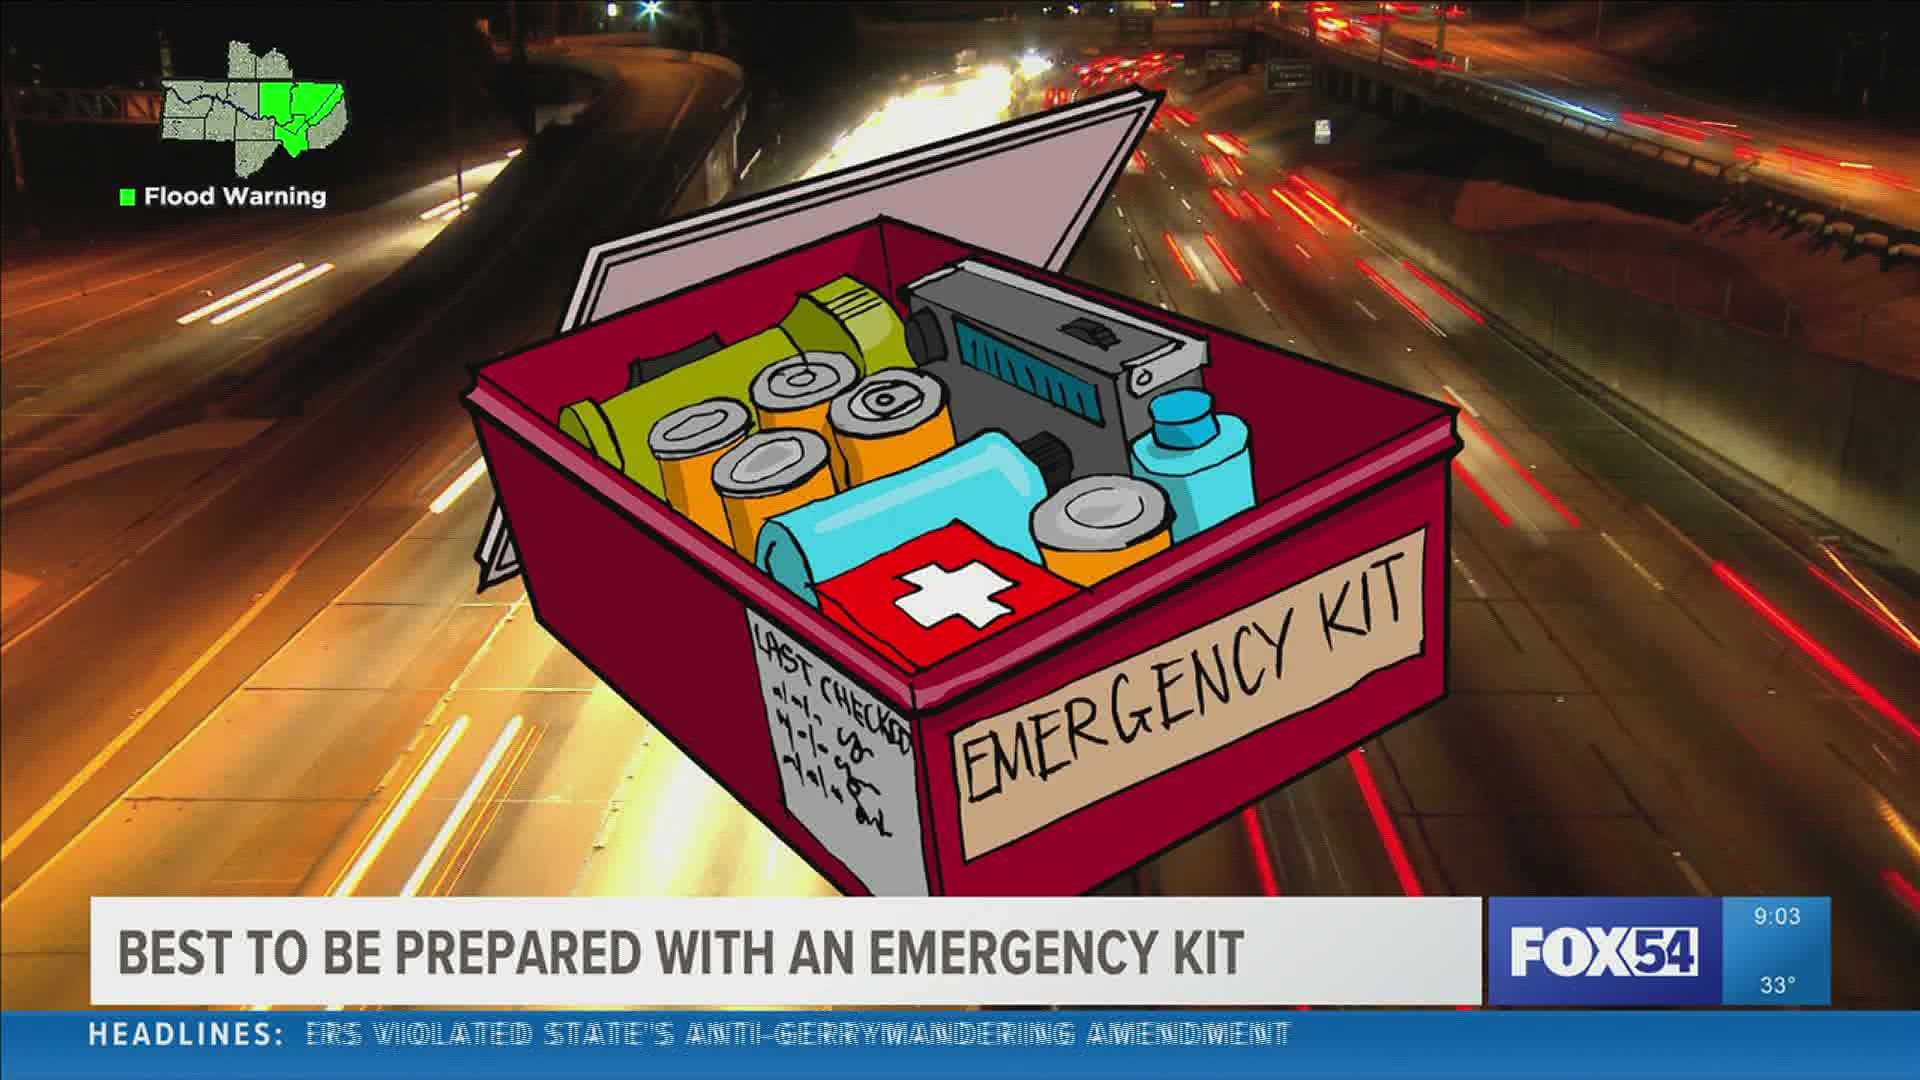 If you're driving in winter weather, make sure you have an emergency kit in your car.